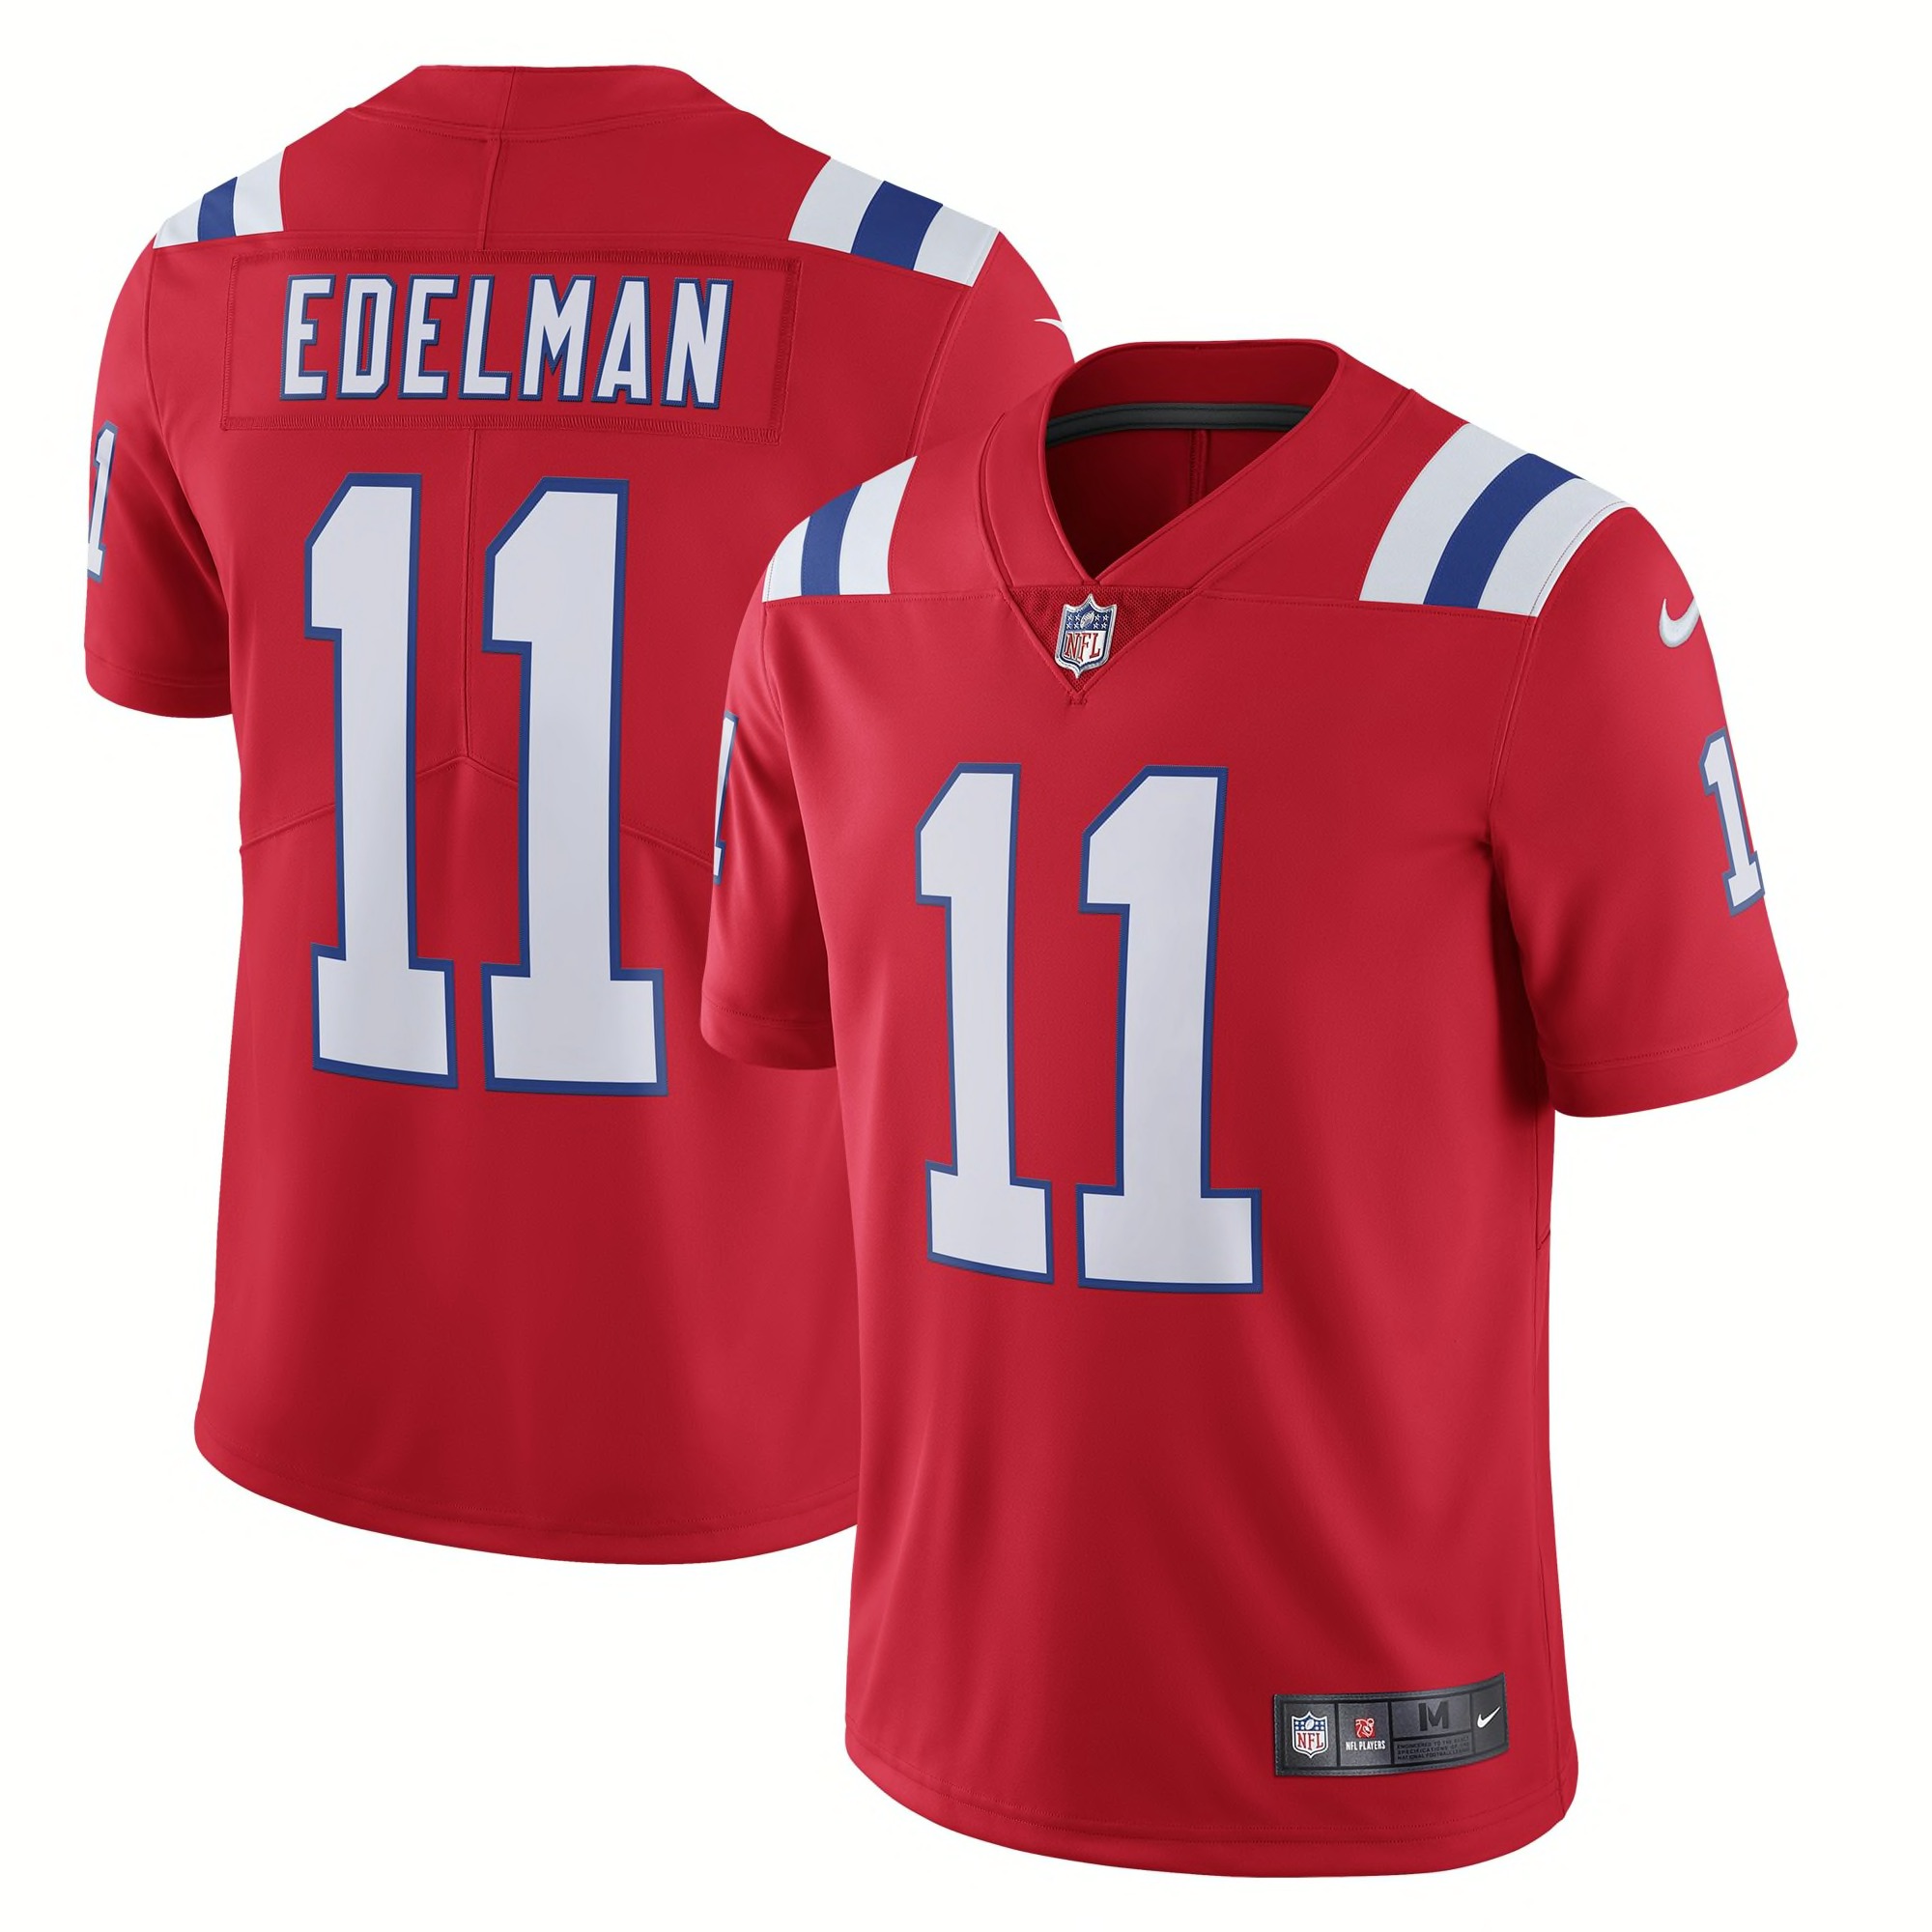 patriots home game jersey